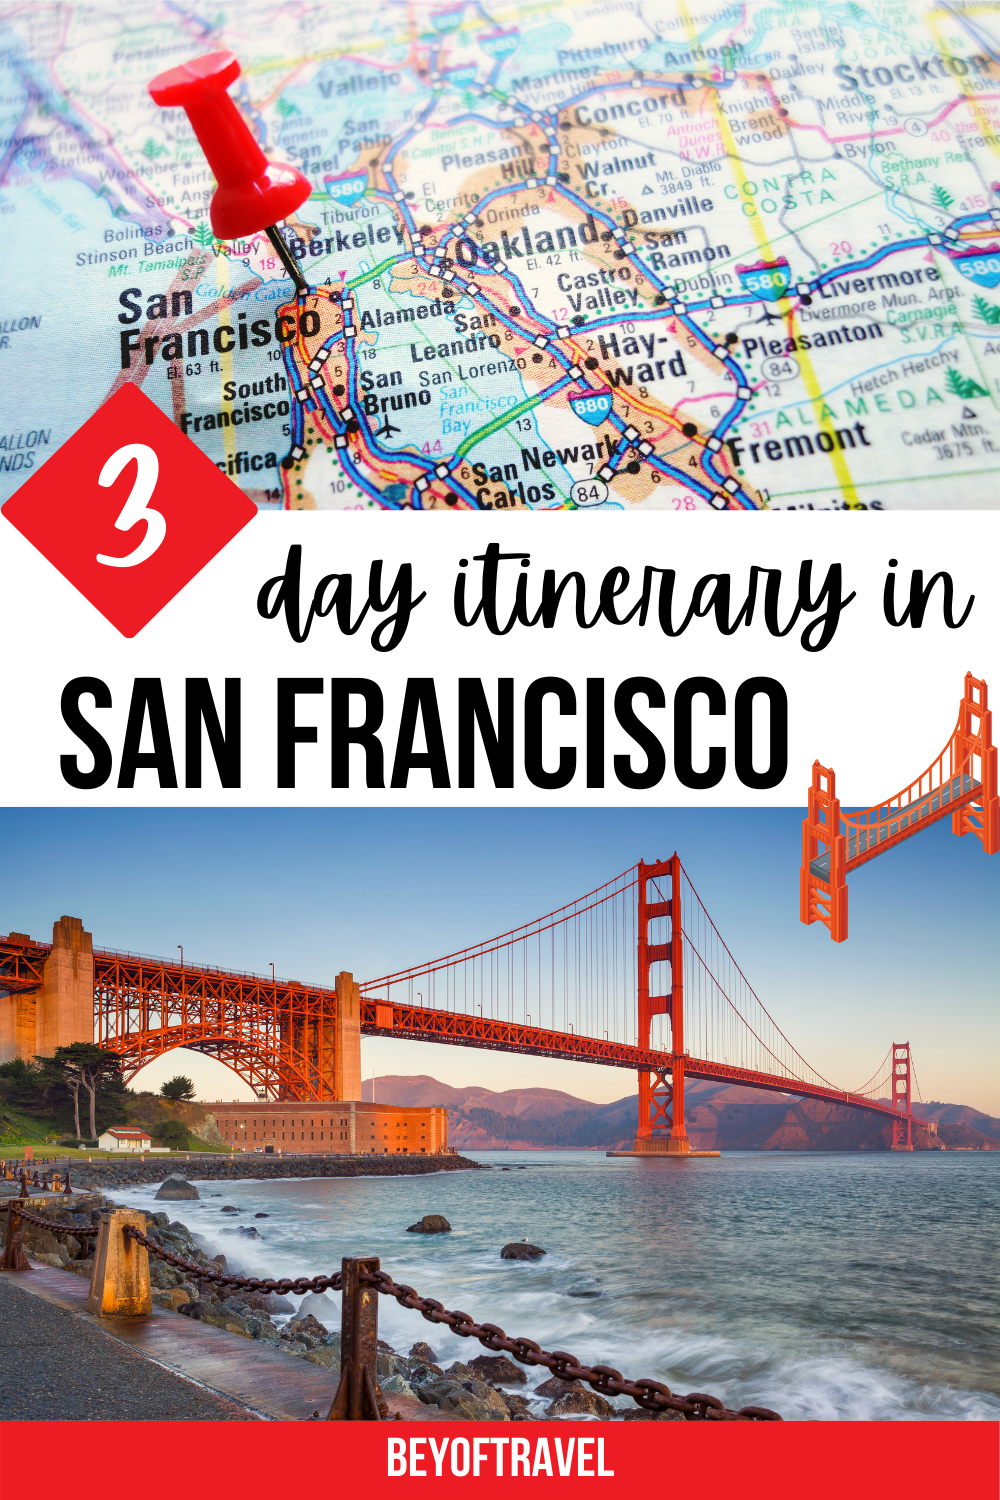 3 days in San Francisco itinerary